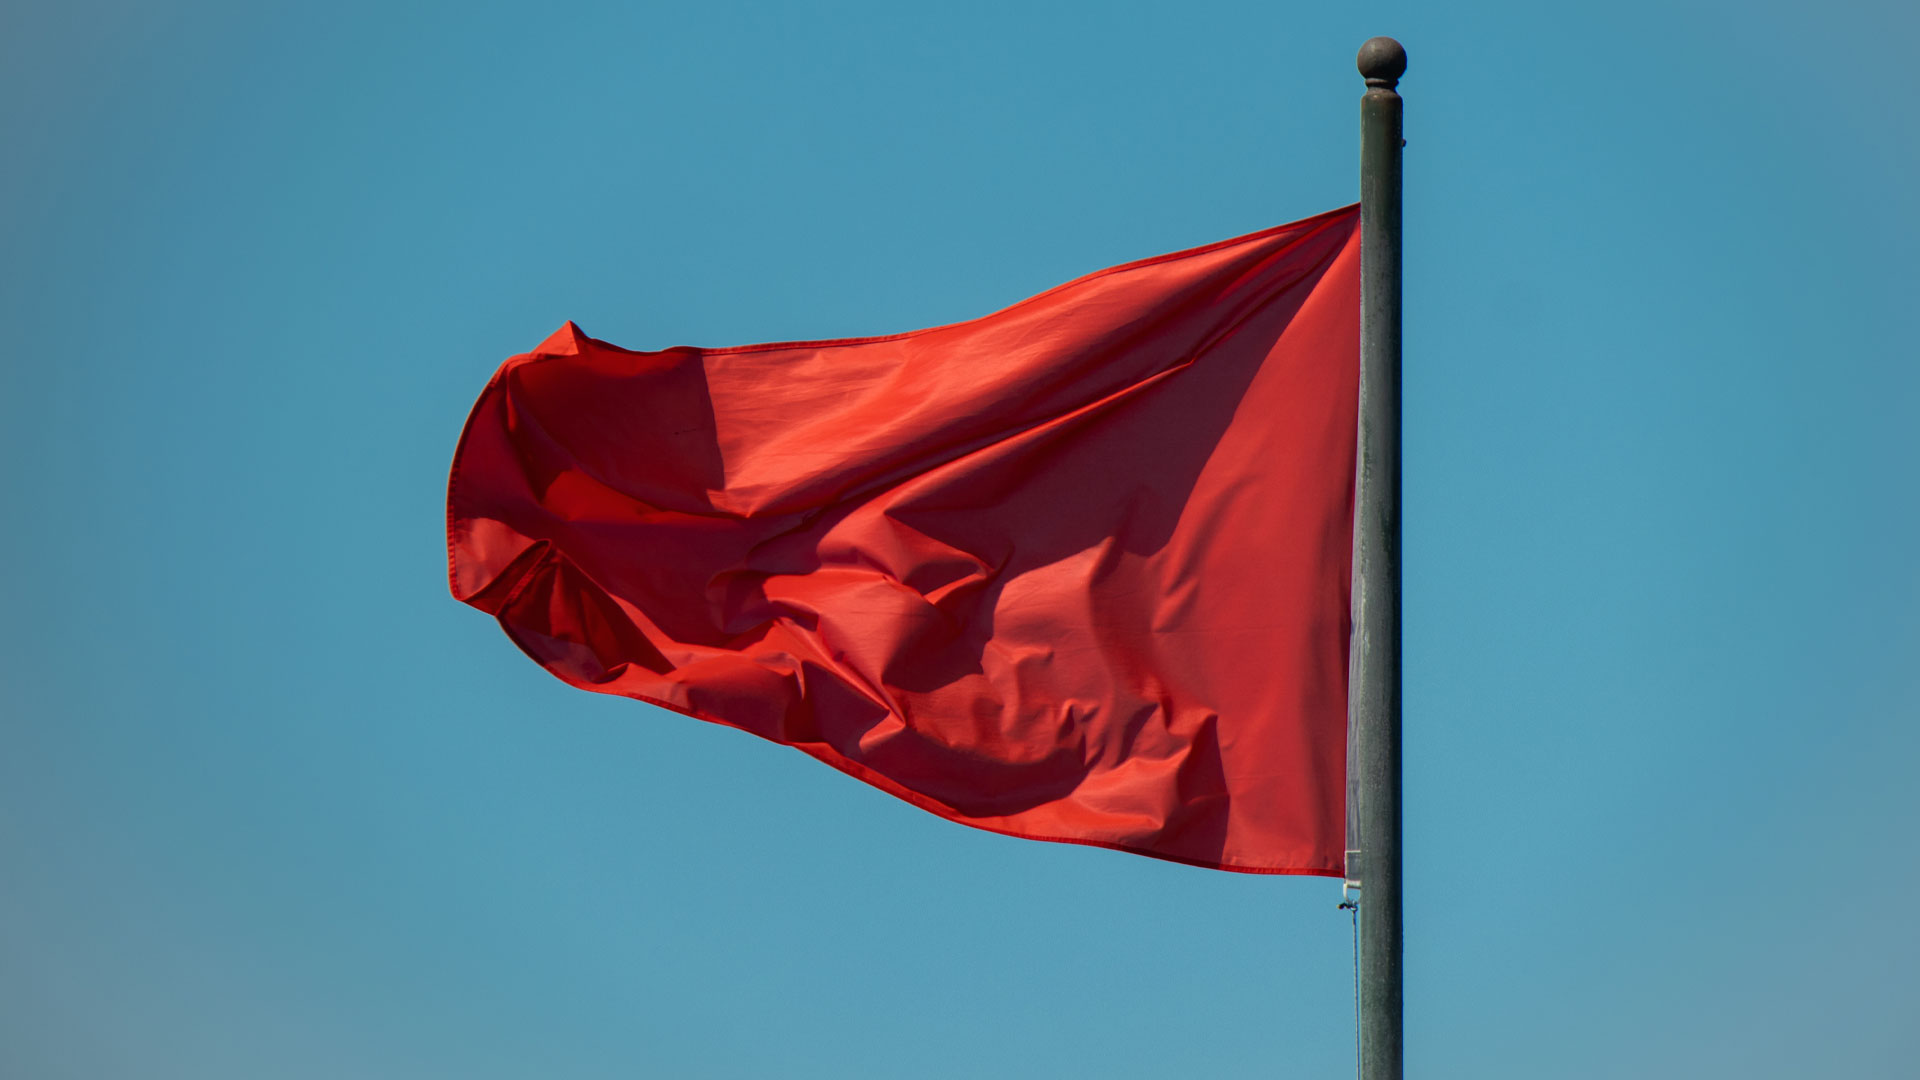 Red coloured flag blowing in the wind.